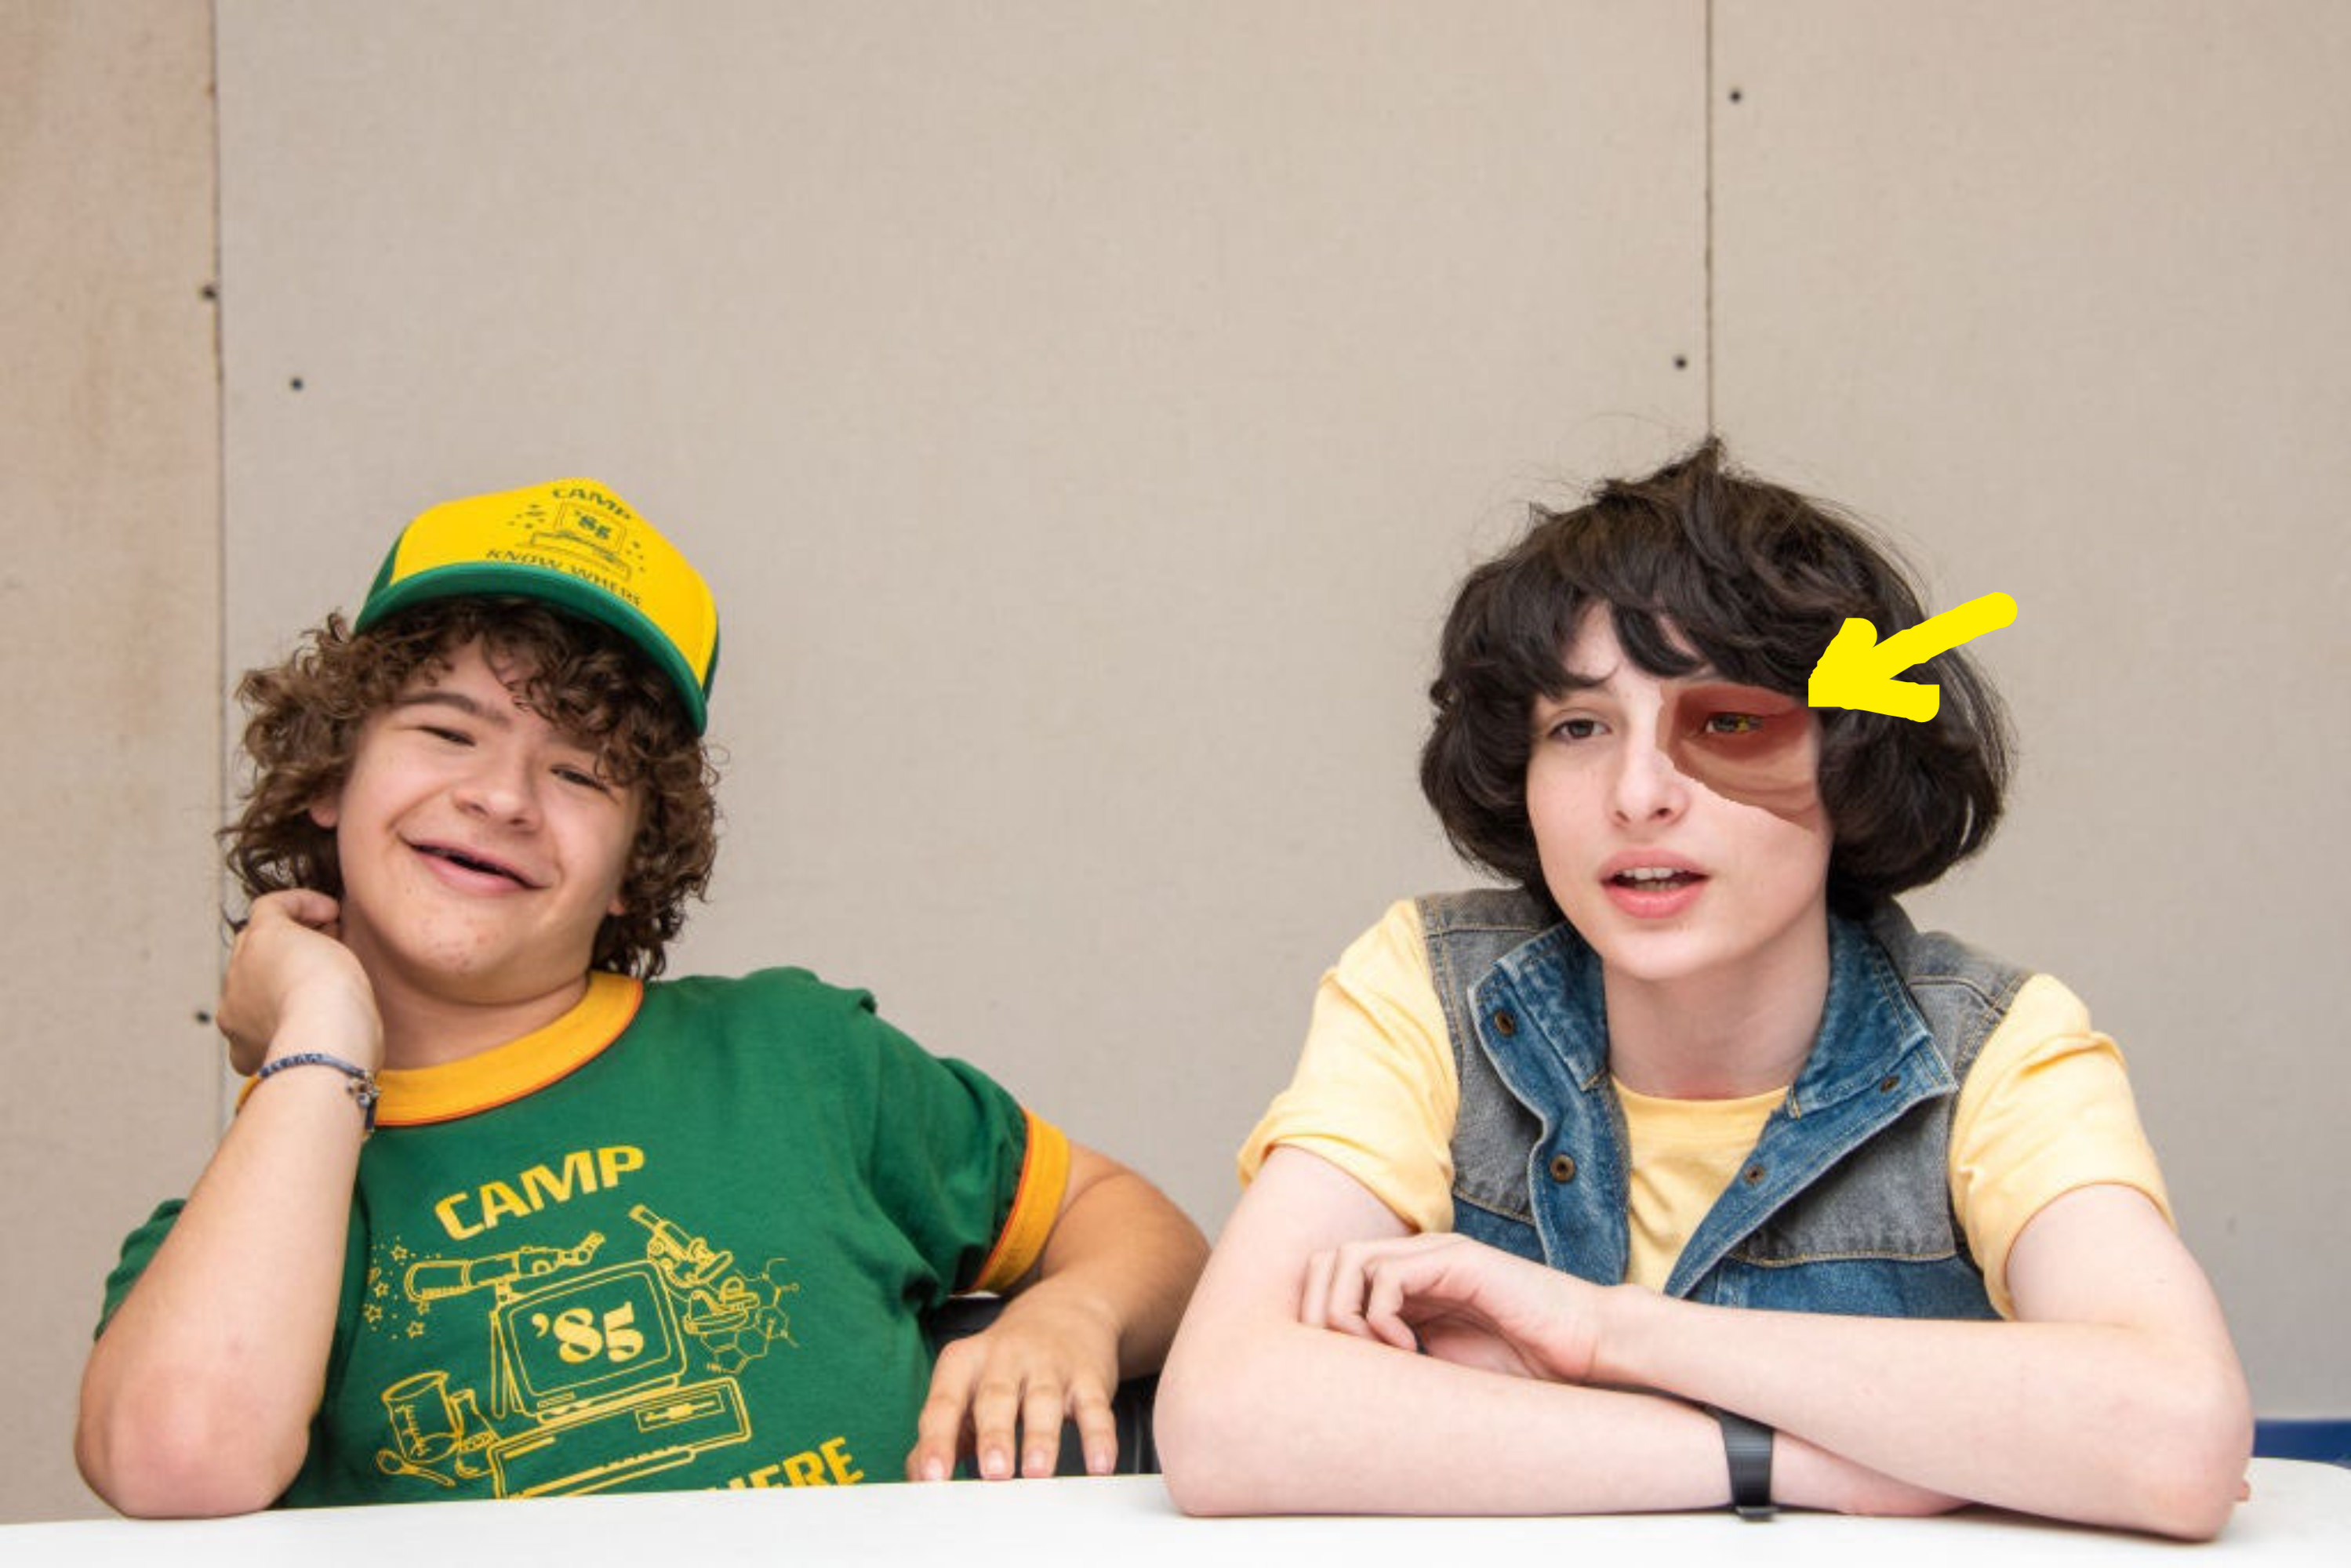 Gaten Matarazzo and Finn Wolfhard on a break during &quot;Stranger Things&quot; filming